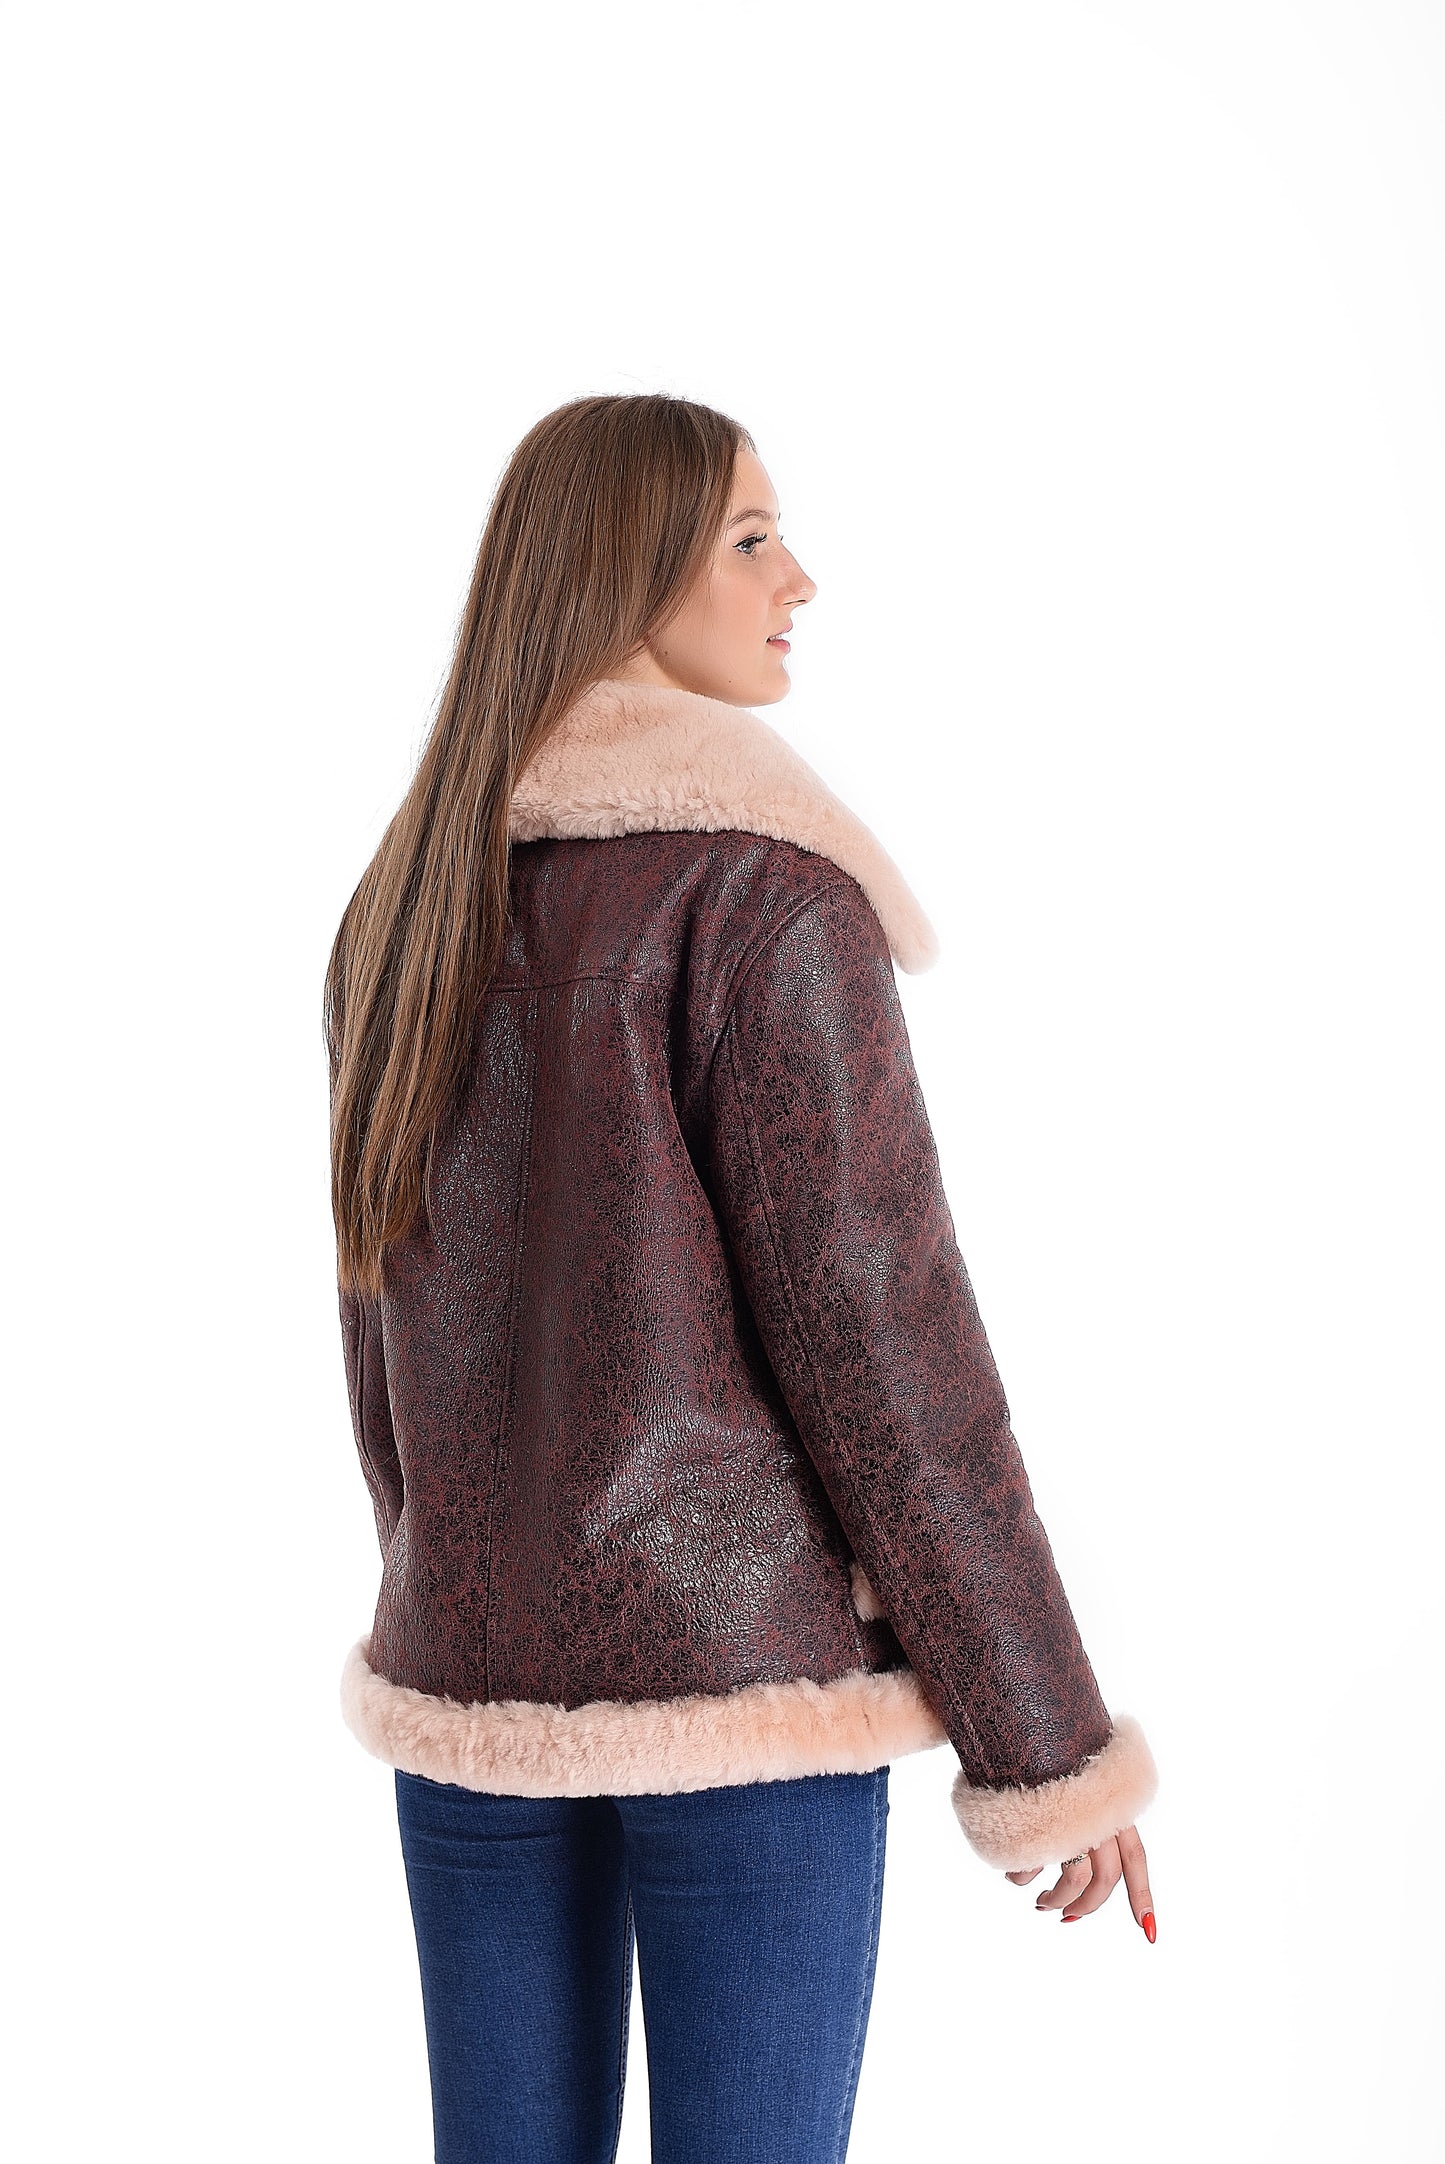 Sheepskin Shearling Womens Jacket with Beige Fur Around the Edges of the Pockets